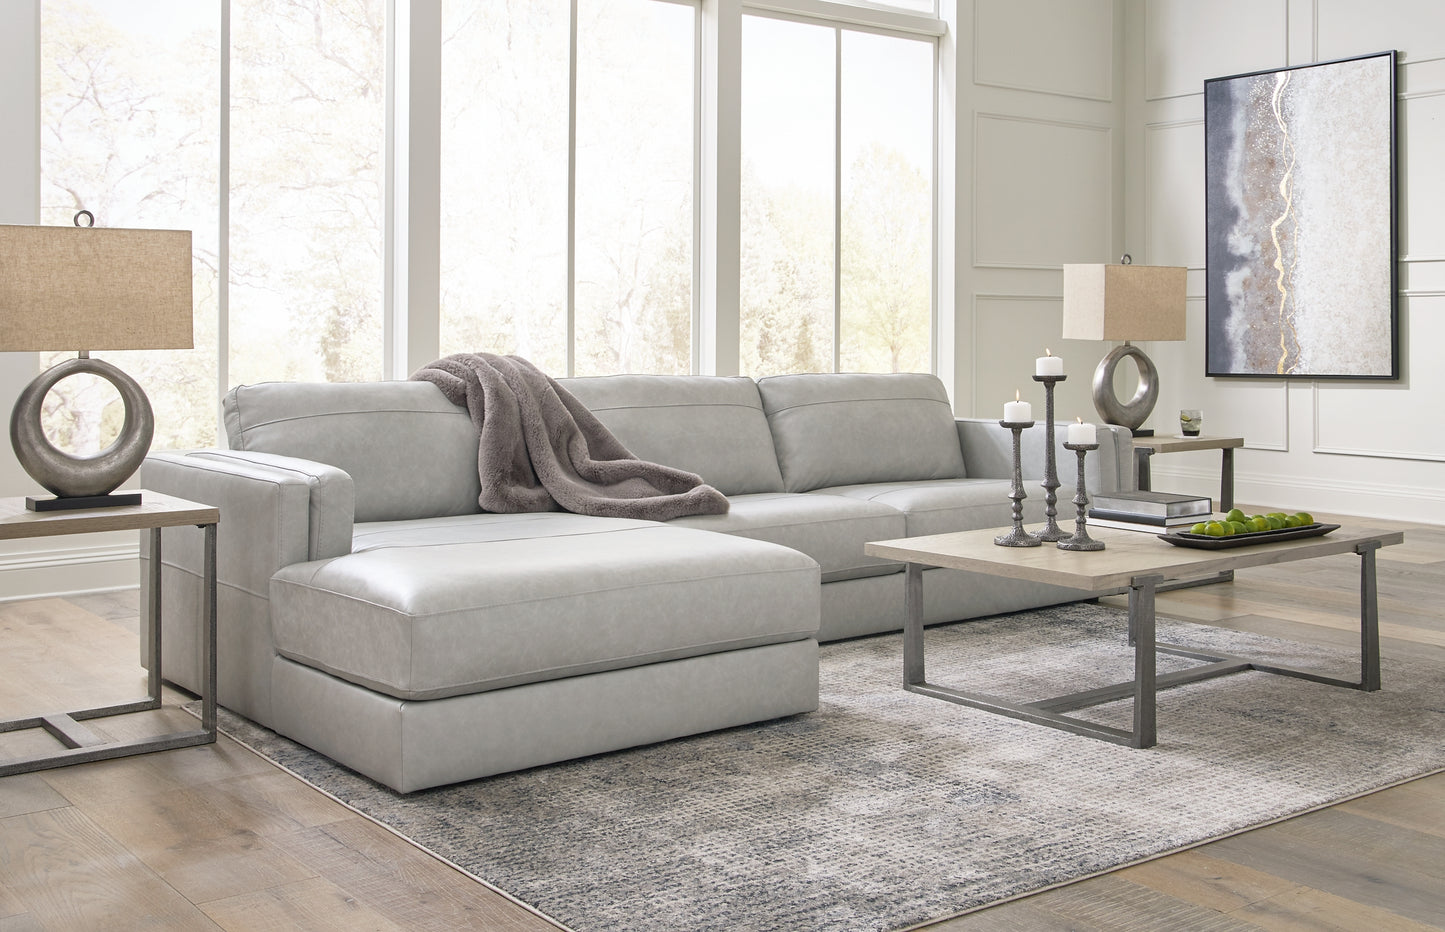 Amiata 2-Piece Sectional with Chaise